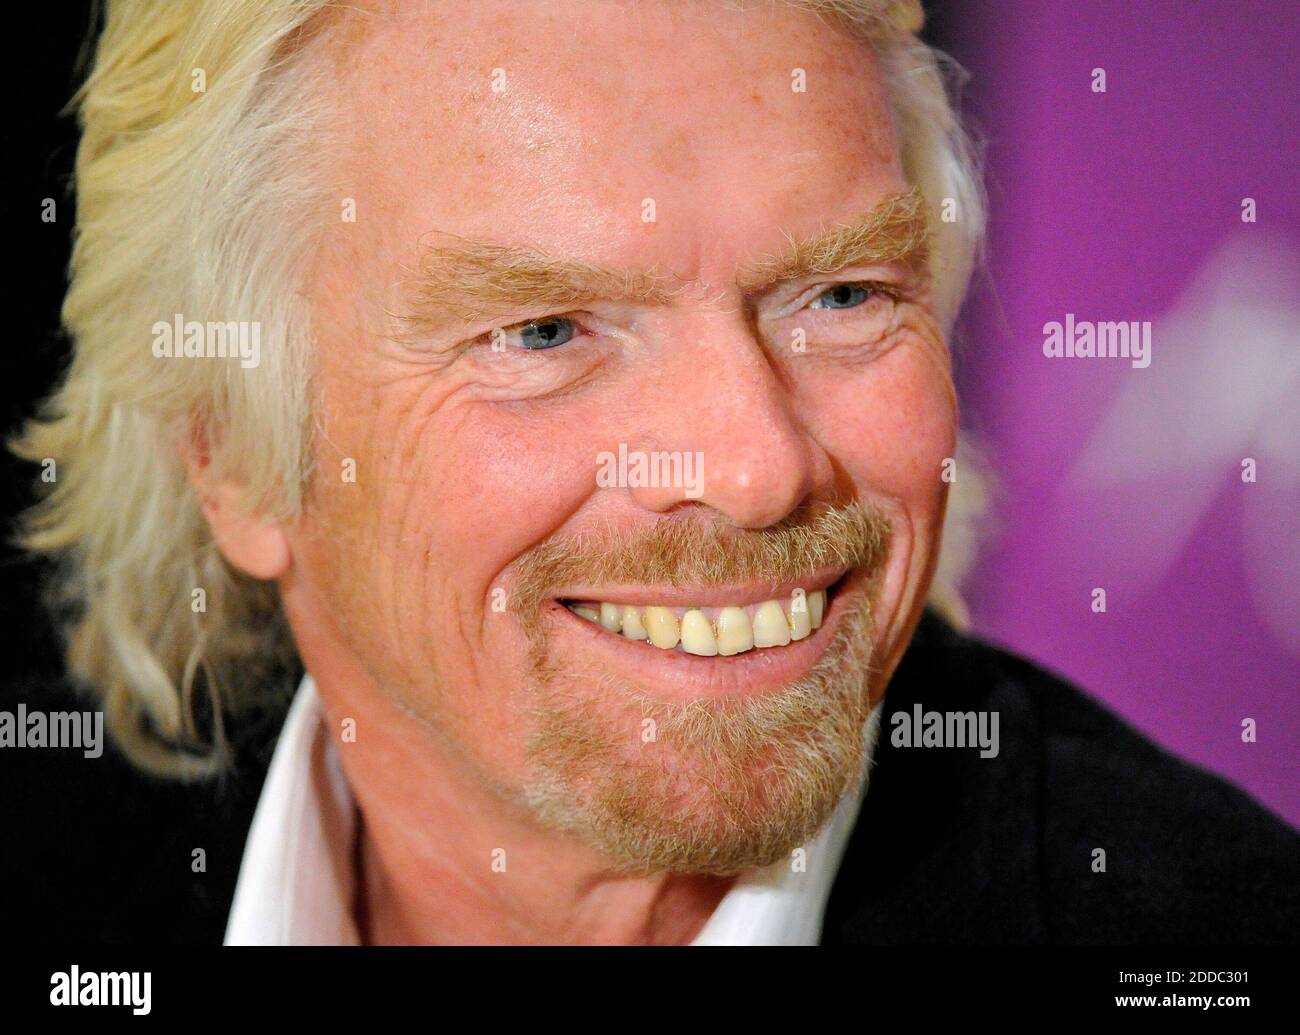 NO FILM, NO VIDEO, NO TV, NO DOCUMENTARY - Sir Richard Branson, founder of Virgin Group, attends a fundraiser supporting MD Anderson Cancer Center at Hilton Anatole in Dallas, TX, USA, Wednesday, January 4, 2012. The 22nd annual 'A Conversation With a Living Legend', benefiting the University of Texas MD Anderson Cancer Center, showcased Sir Richard Branson with an interview with broadcast journalist Miles O'Brien. Photo by Max Faulkner/Fort Worth Star-Telegram/MCT/ABACAPRESS.COM Stock Photo